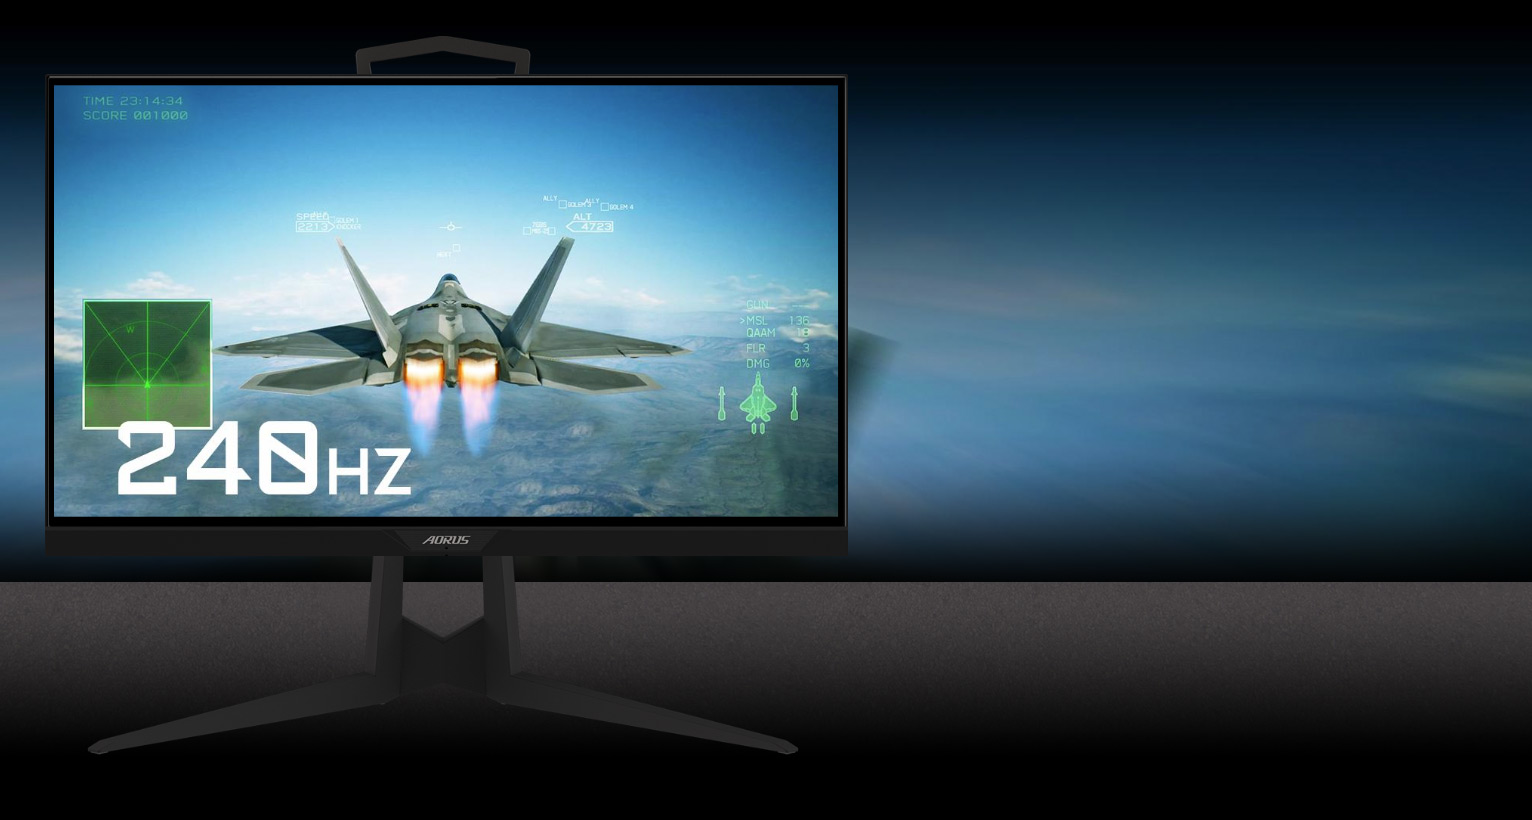 a fighter plane as the screenshot to show the effect of 240HZ